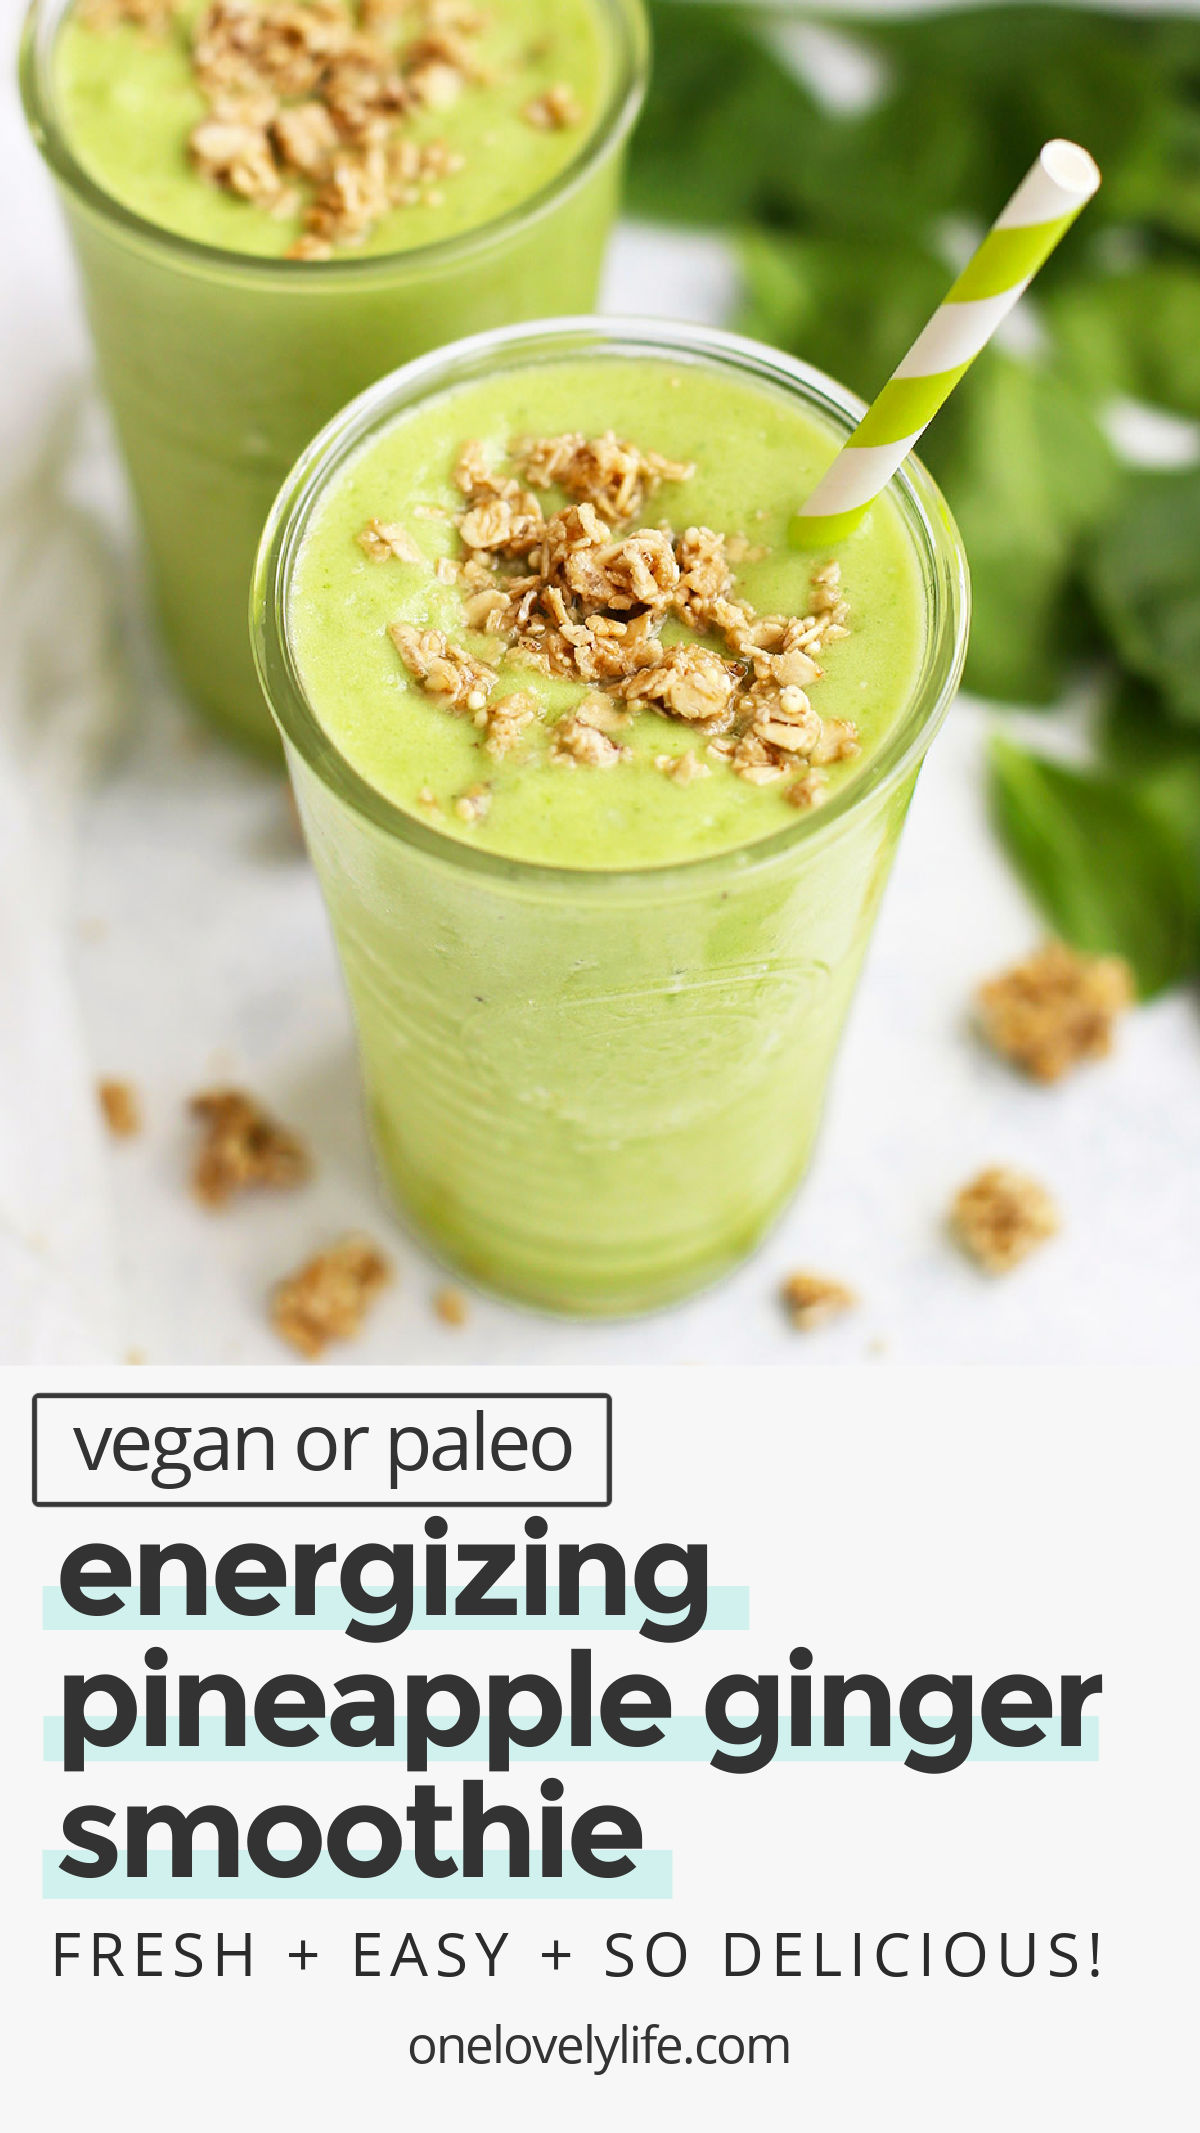 Energizing Pineapple Ginger Smoothie - With bright, fresh flavor, this pineapple smoothie is the perfect way to fuel or brighten your day. // Ginger Smoothie // healthy pineapple smoothie // pineapple green smoothie // green smoothie recipe / kid friendly green smoothie / green smoothie that tastes good // vegan smoothie // paleo smoothie // gluten free smoothie // healthy breakfast // healthy snack // vegan breakfast // paleo breakfast // paleo snack // vegan snack // fruit smoothie